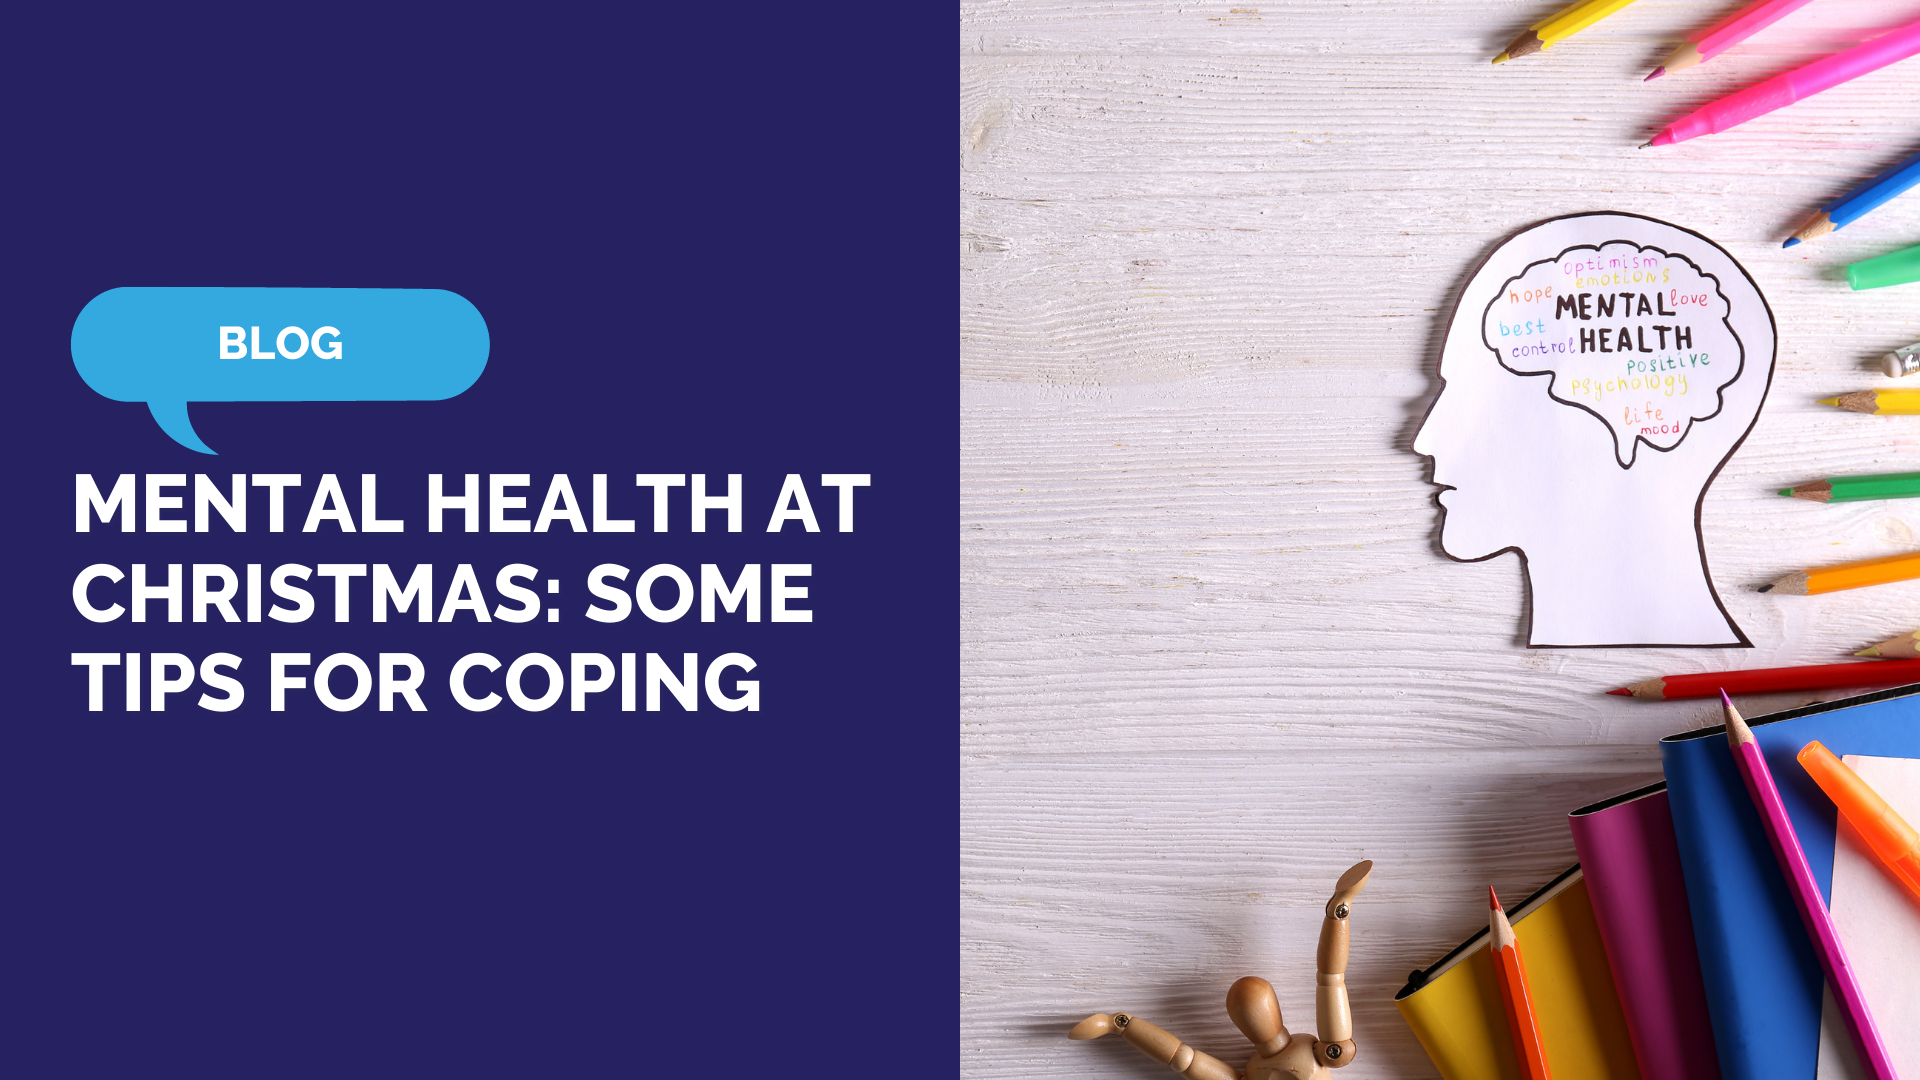 Mental Health at Christmas: Some Tips for Coping